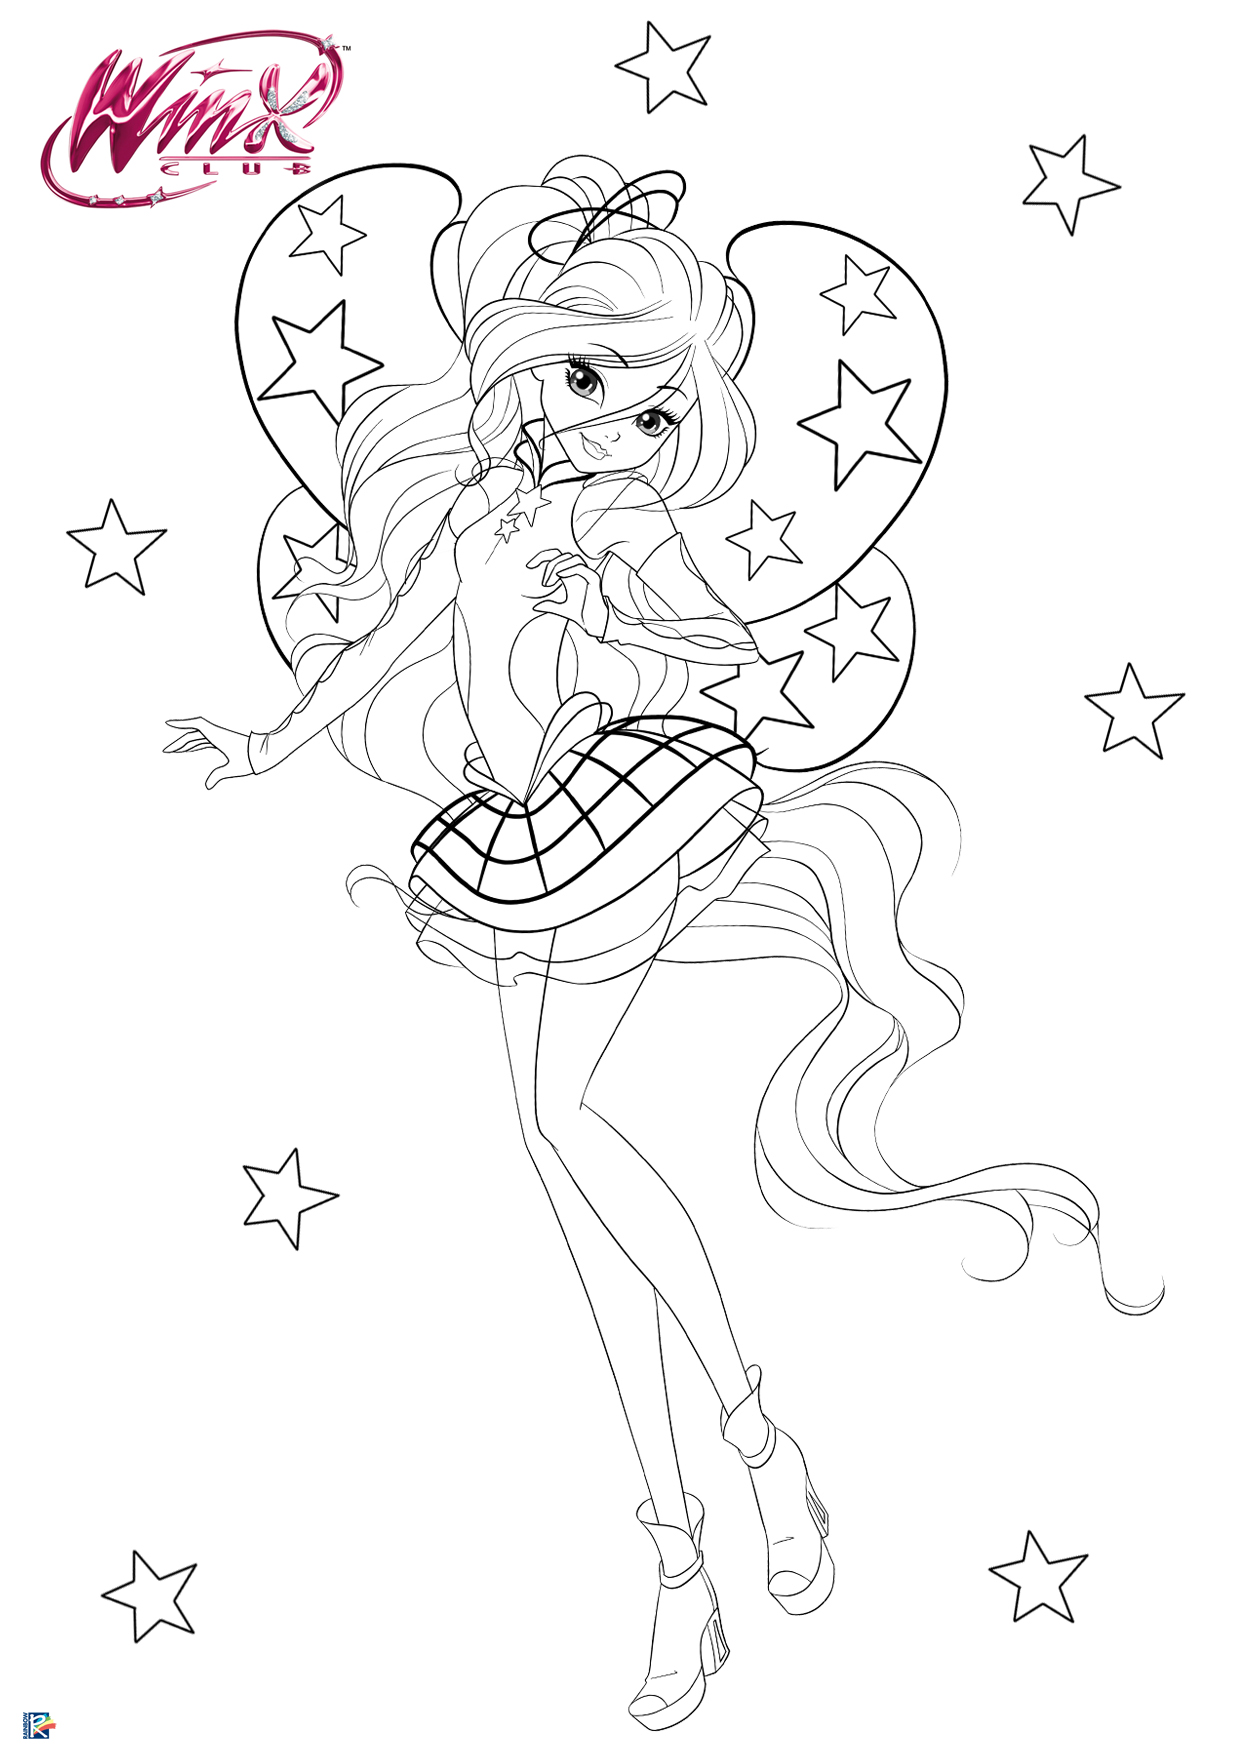 Winx Club Season 8 Coloring Pages With Cosmix Transformation Youloveit Com